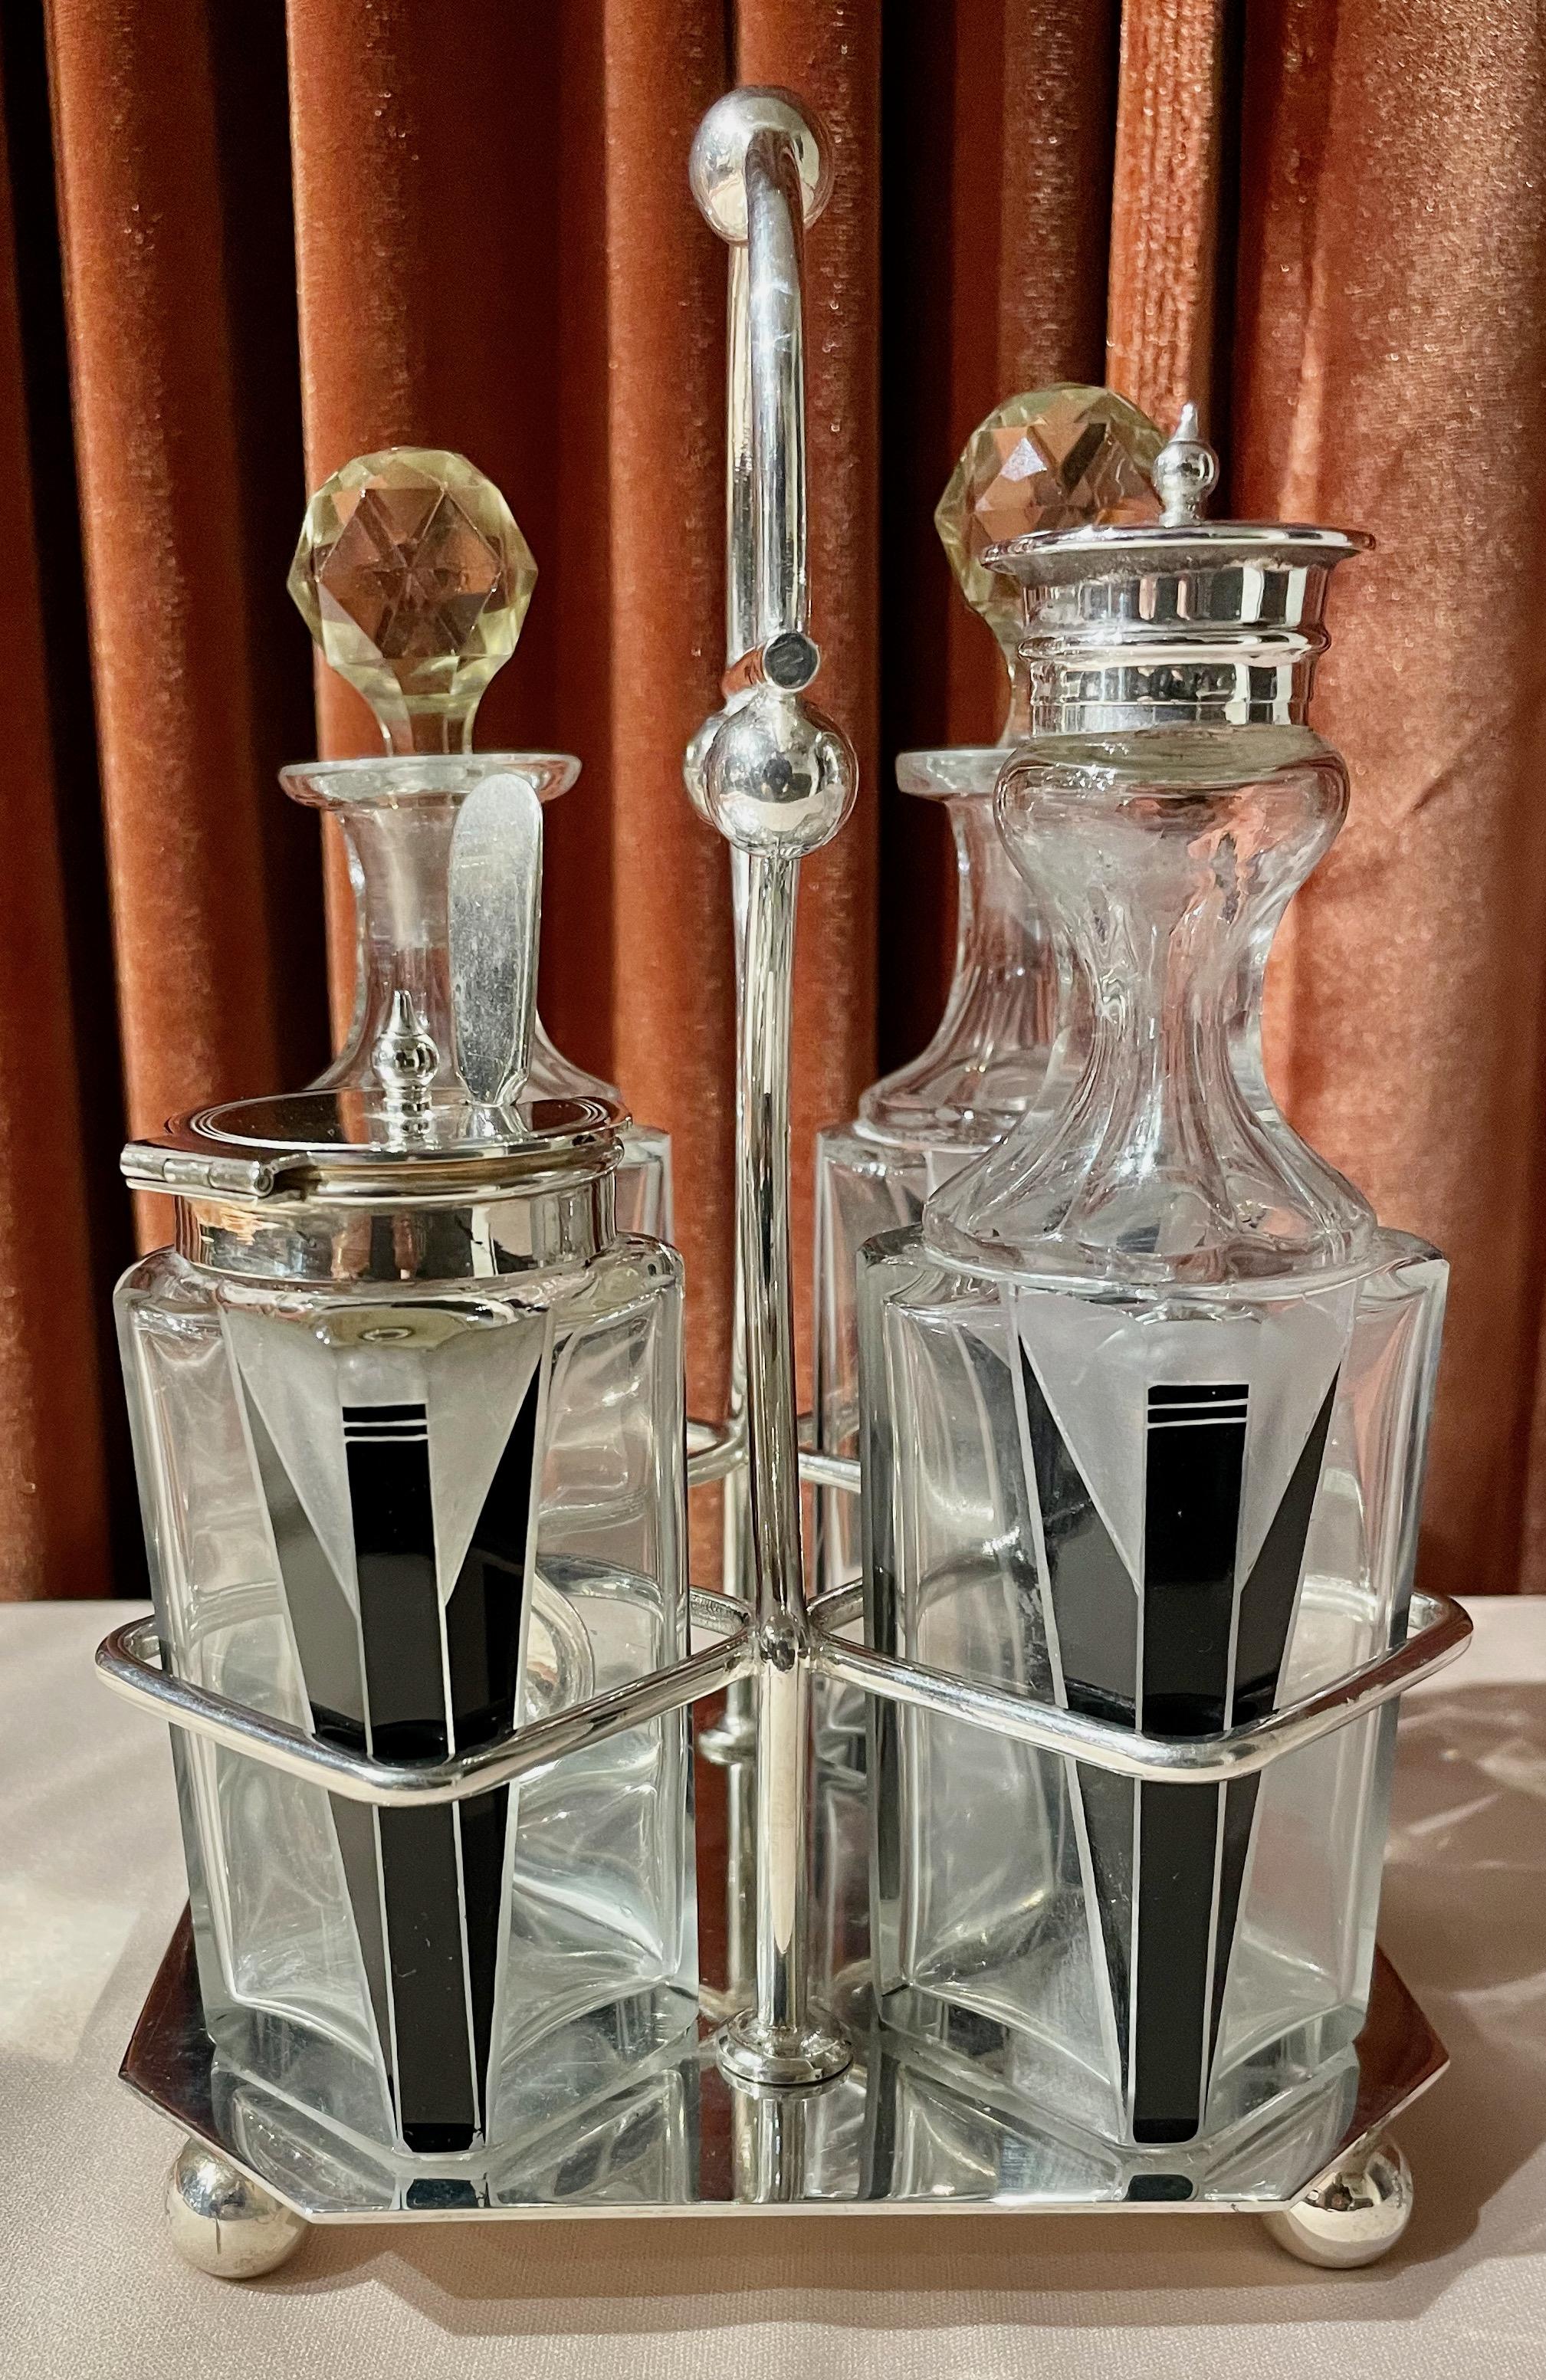 Karl Palda Czech Modernist 5 piece Tableware Cruet set. Spectacular example and a rare cruet set. All pieces are in excellent condition. Also, included is a spoon for jam jar or? Oil & Vinegar with crystal faceted top closers and original tops for